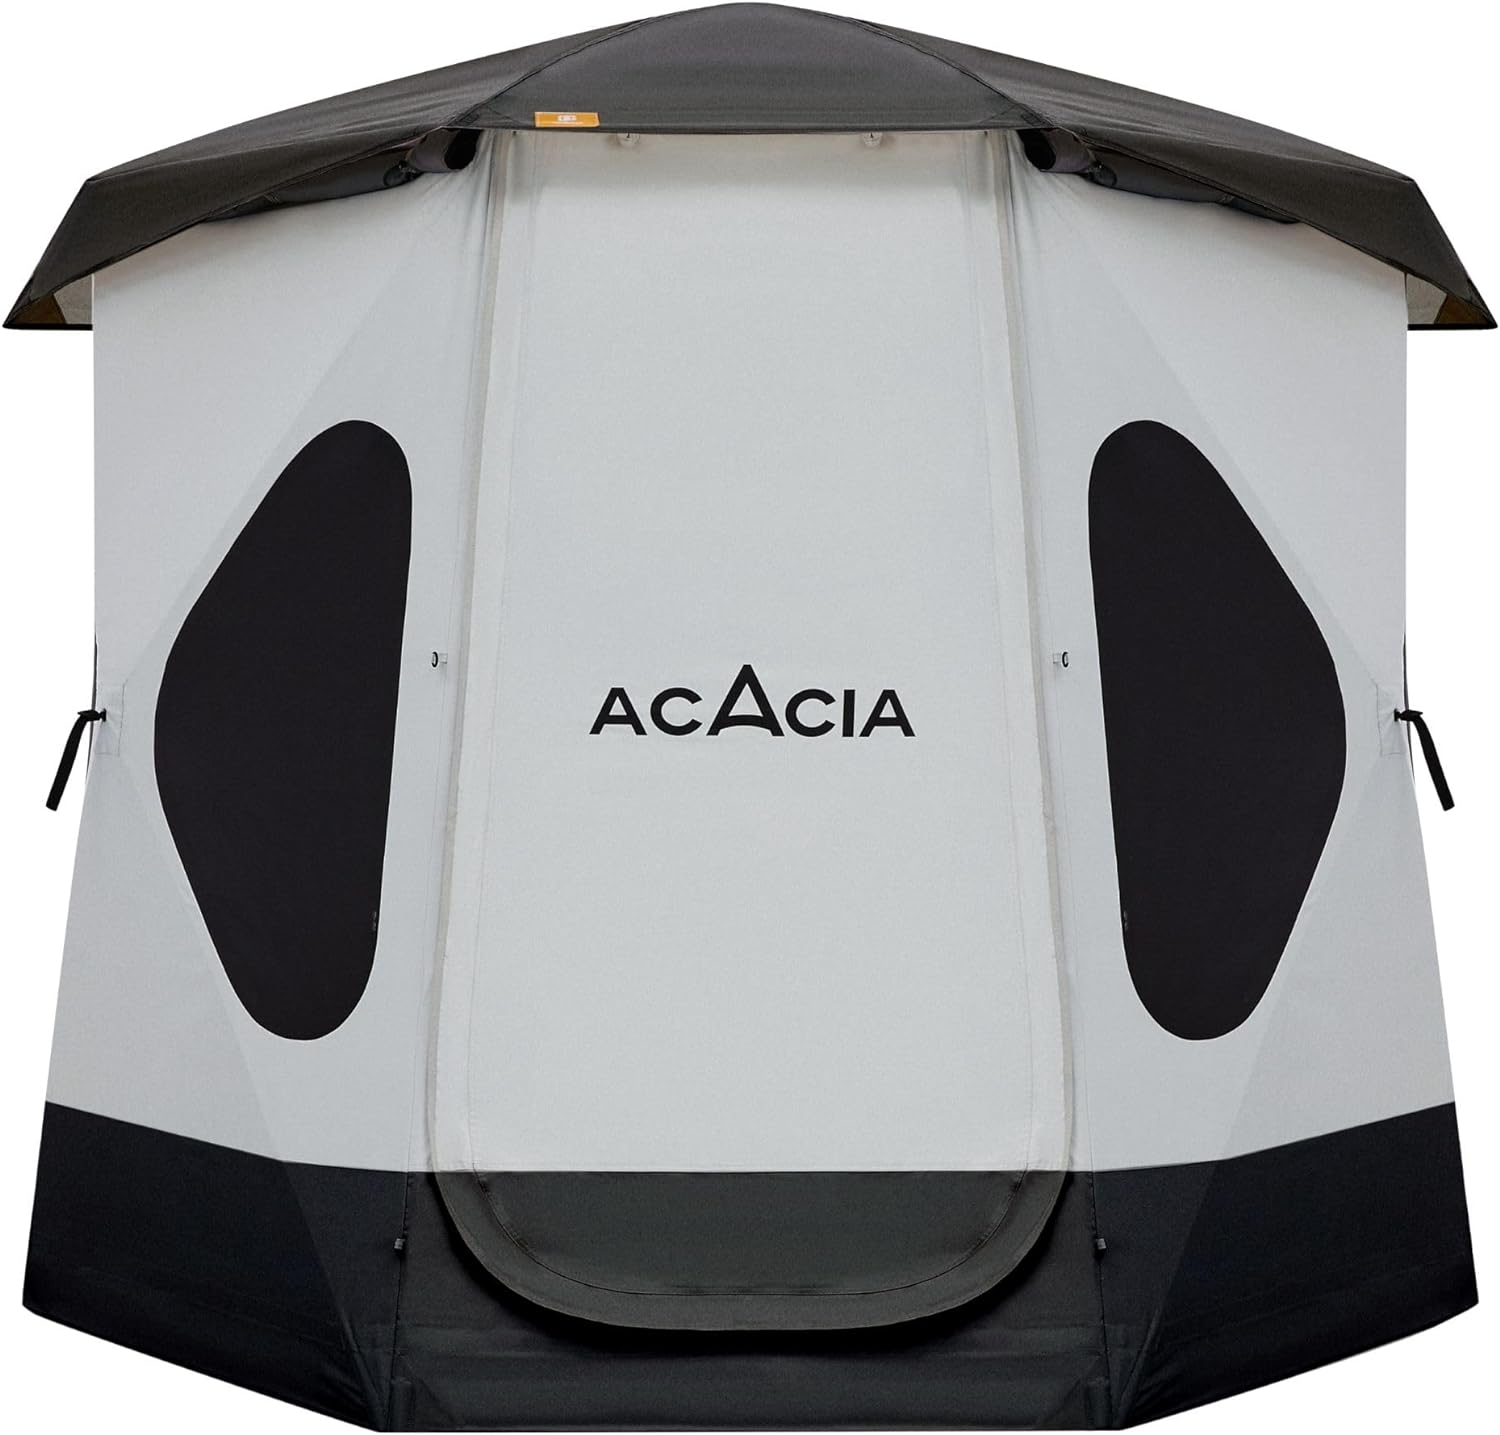 Space Acacia Camping Tent, 2-3 Person Pop Up Tent $172.96